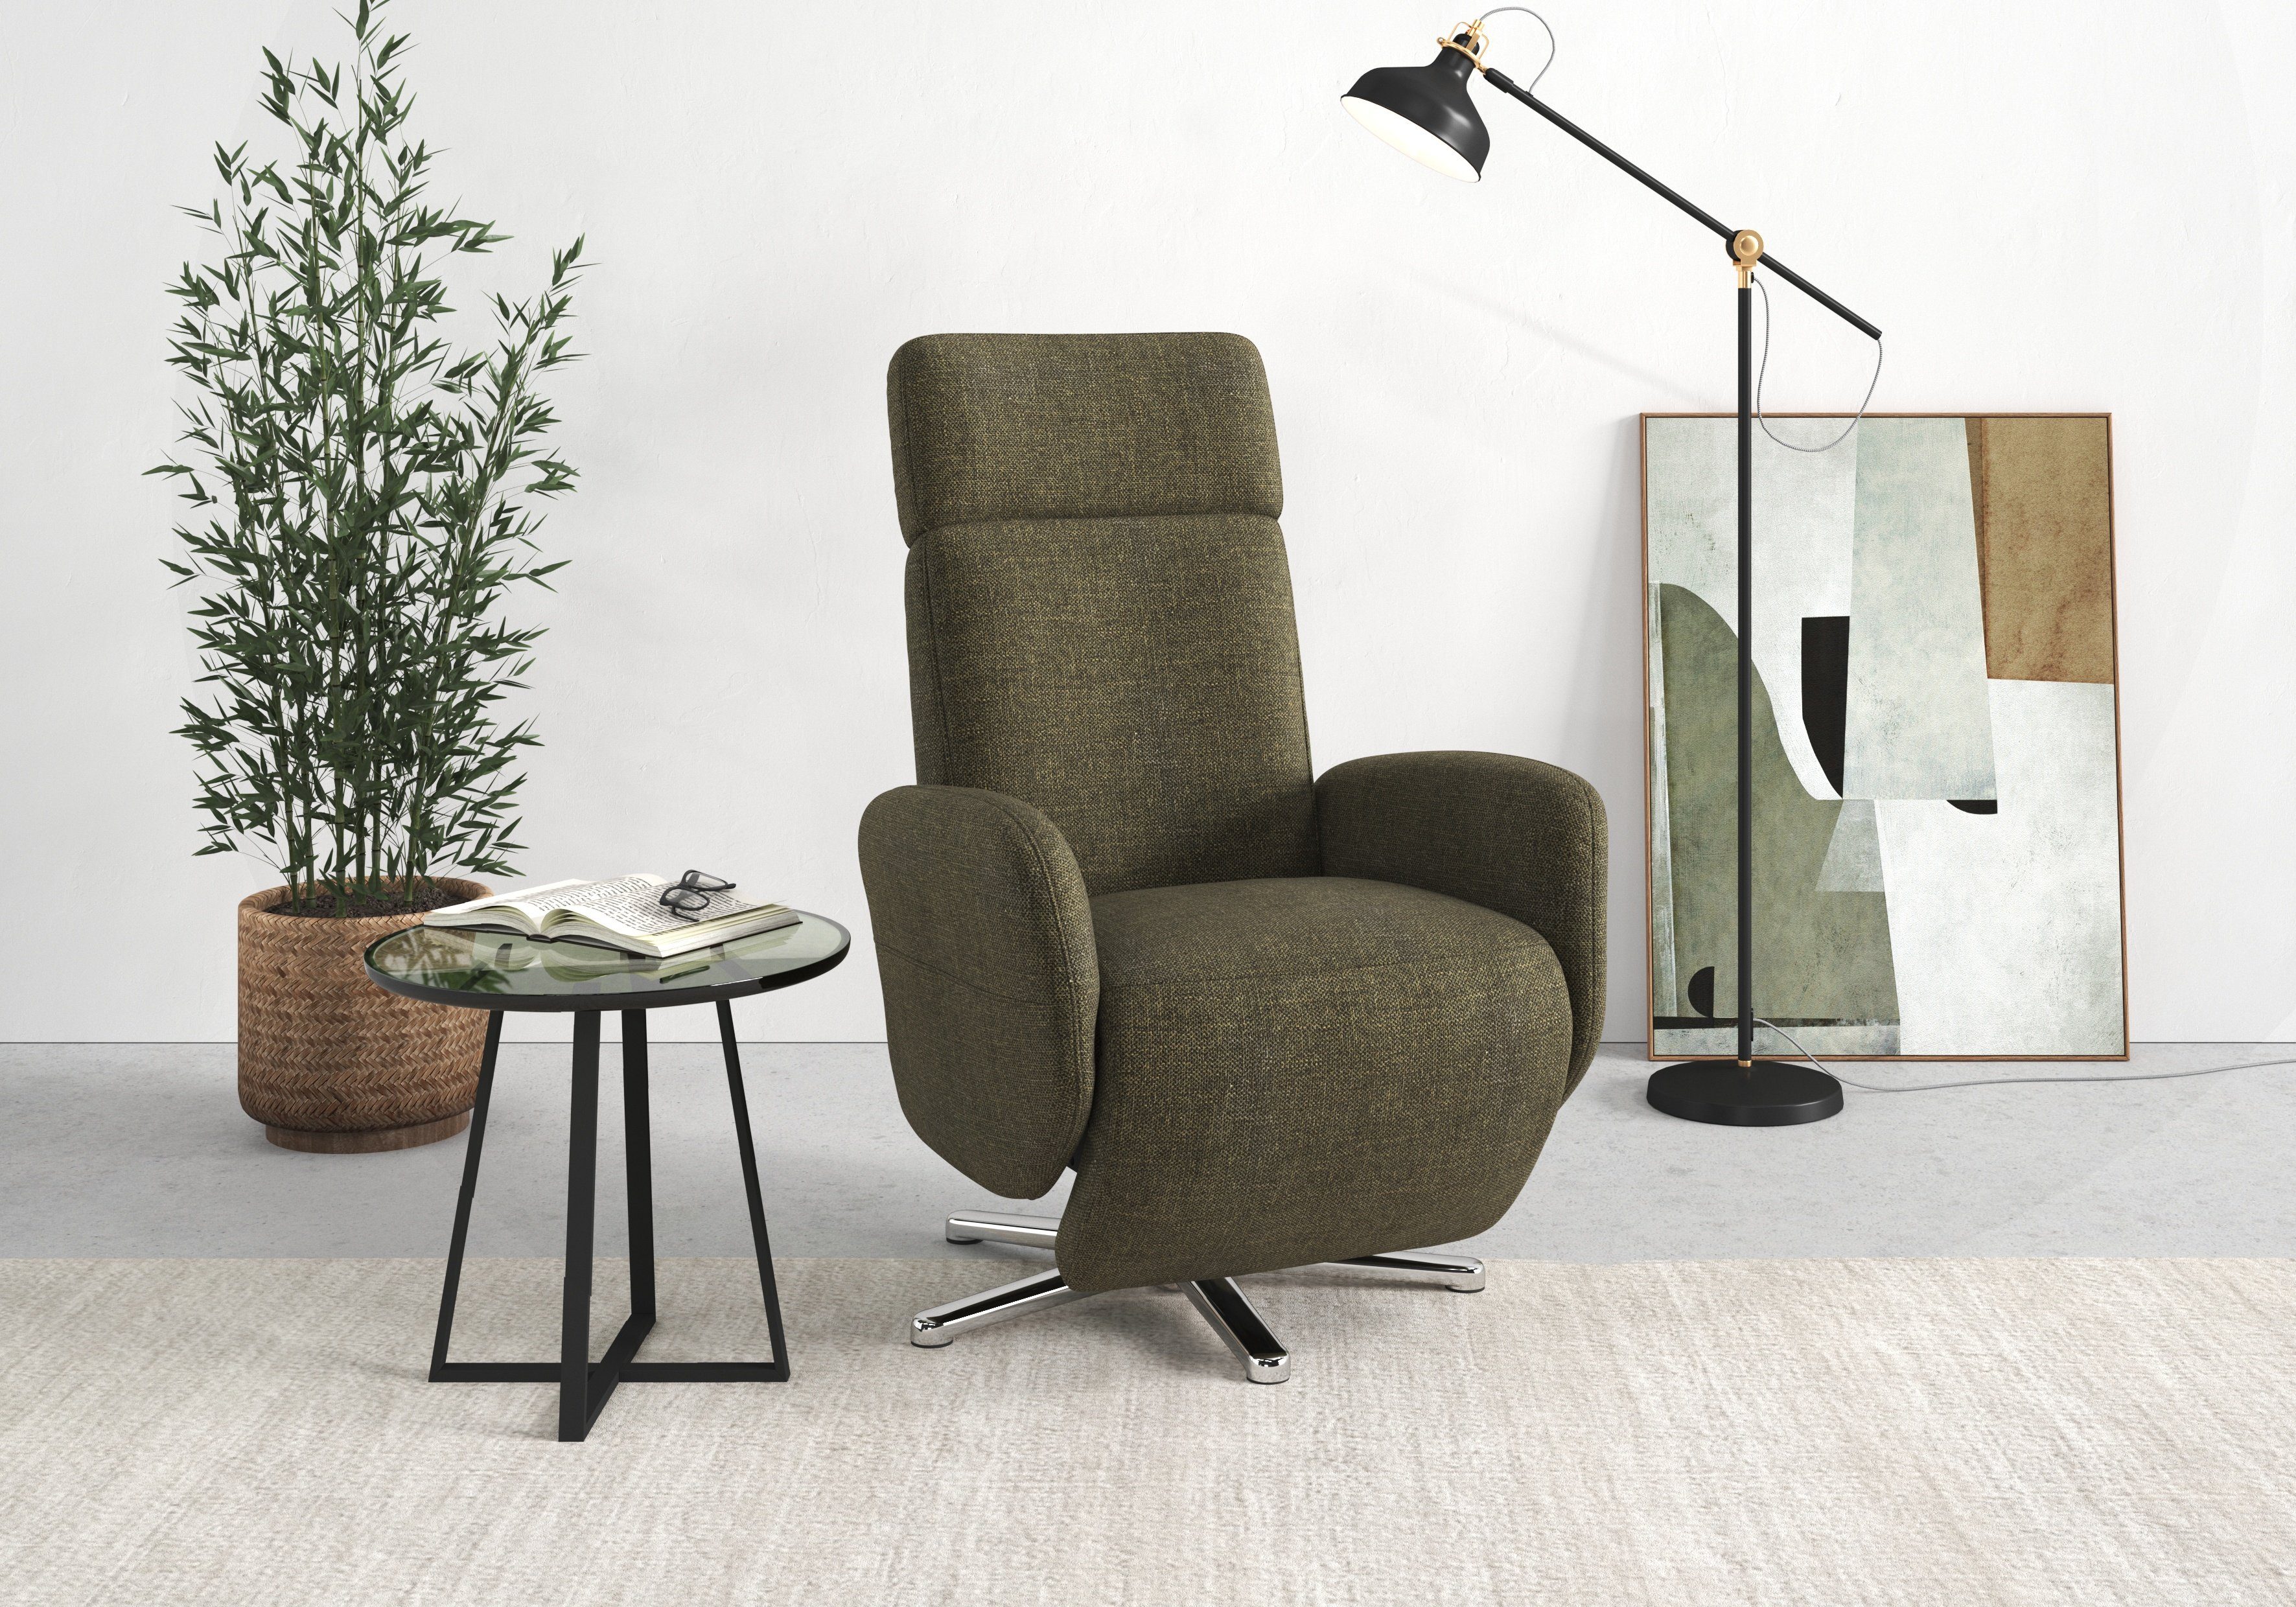 sit&more Relaxfauteuil